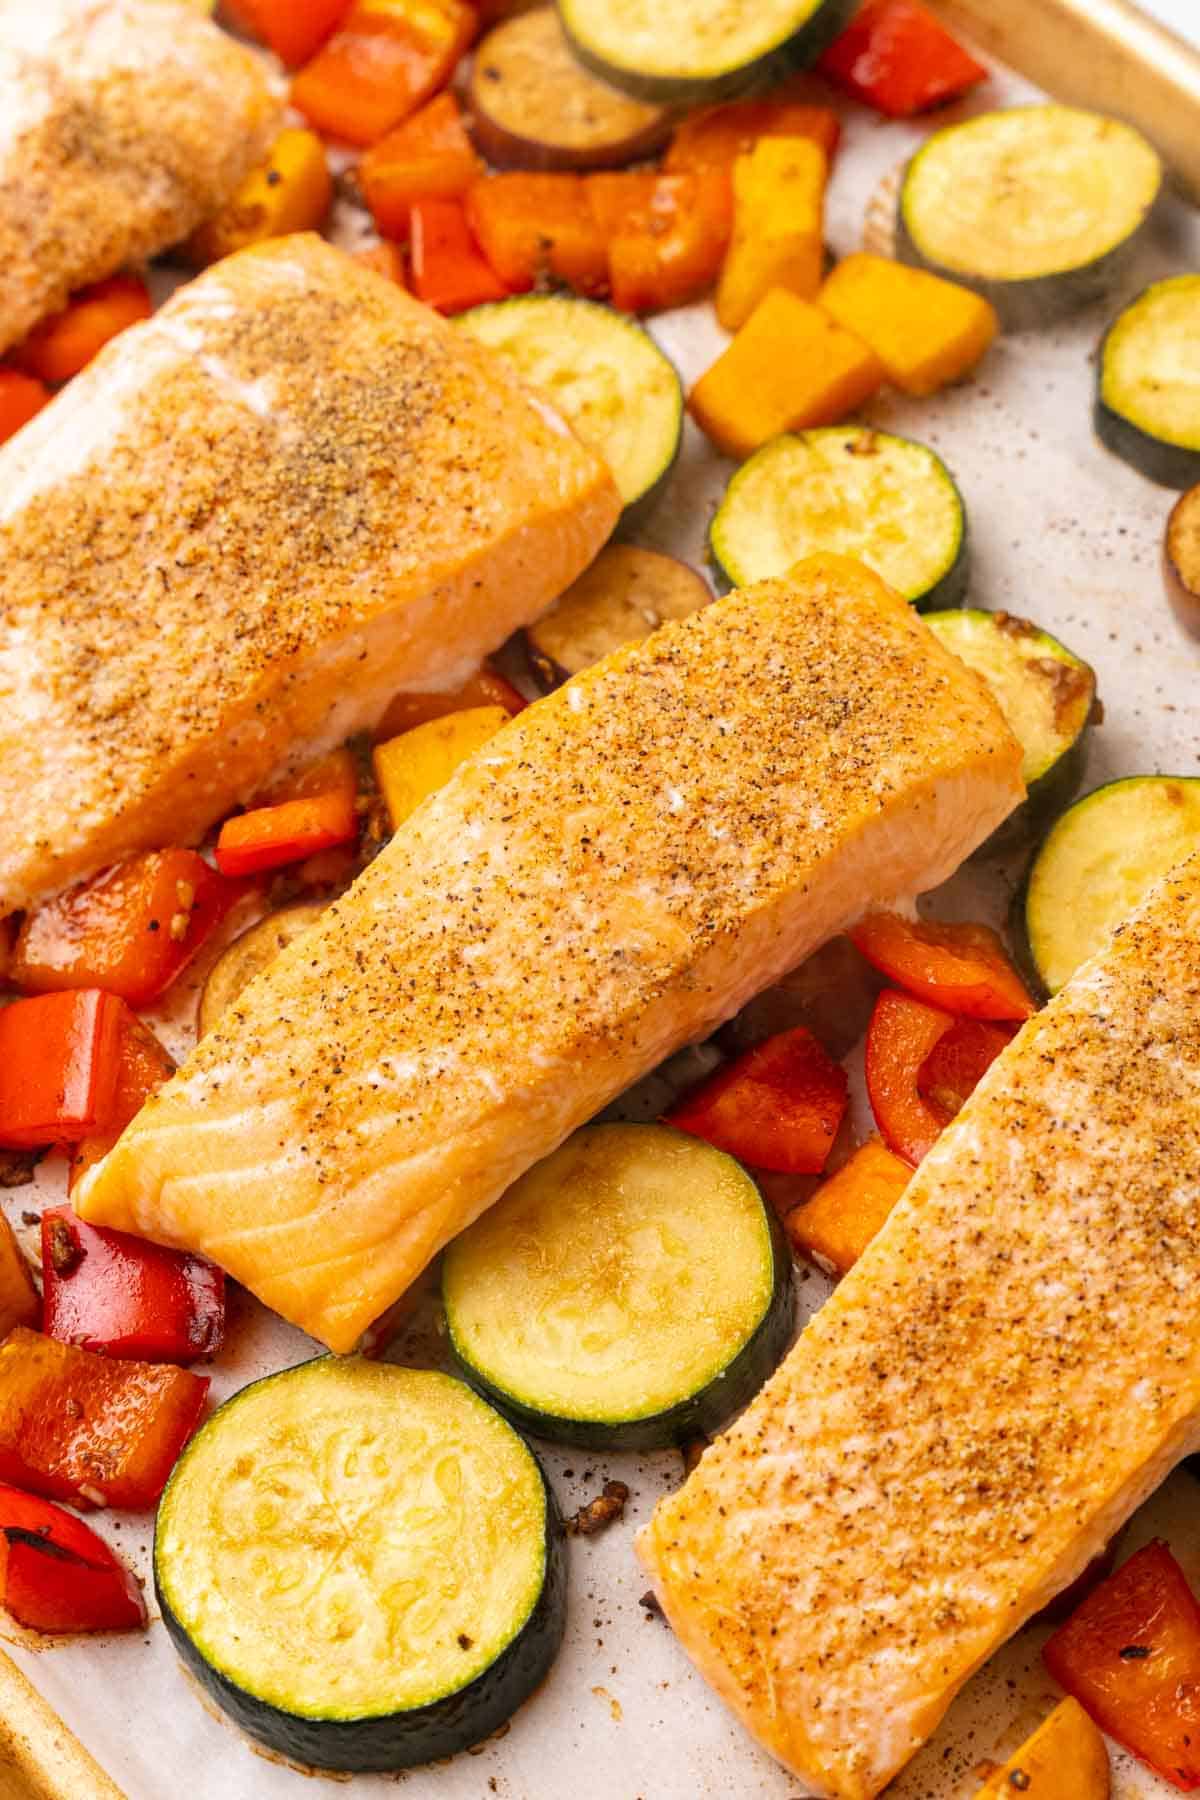 Four roasted salmon filets on top of baked veggies on a baking sheet lined with parchment paper